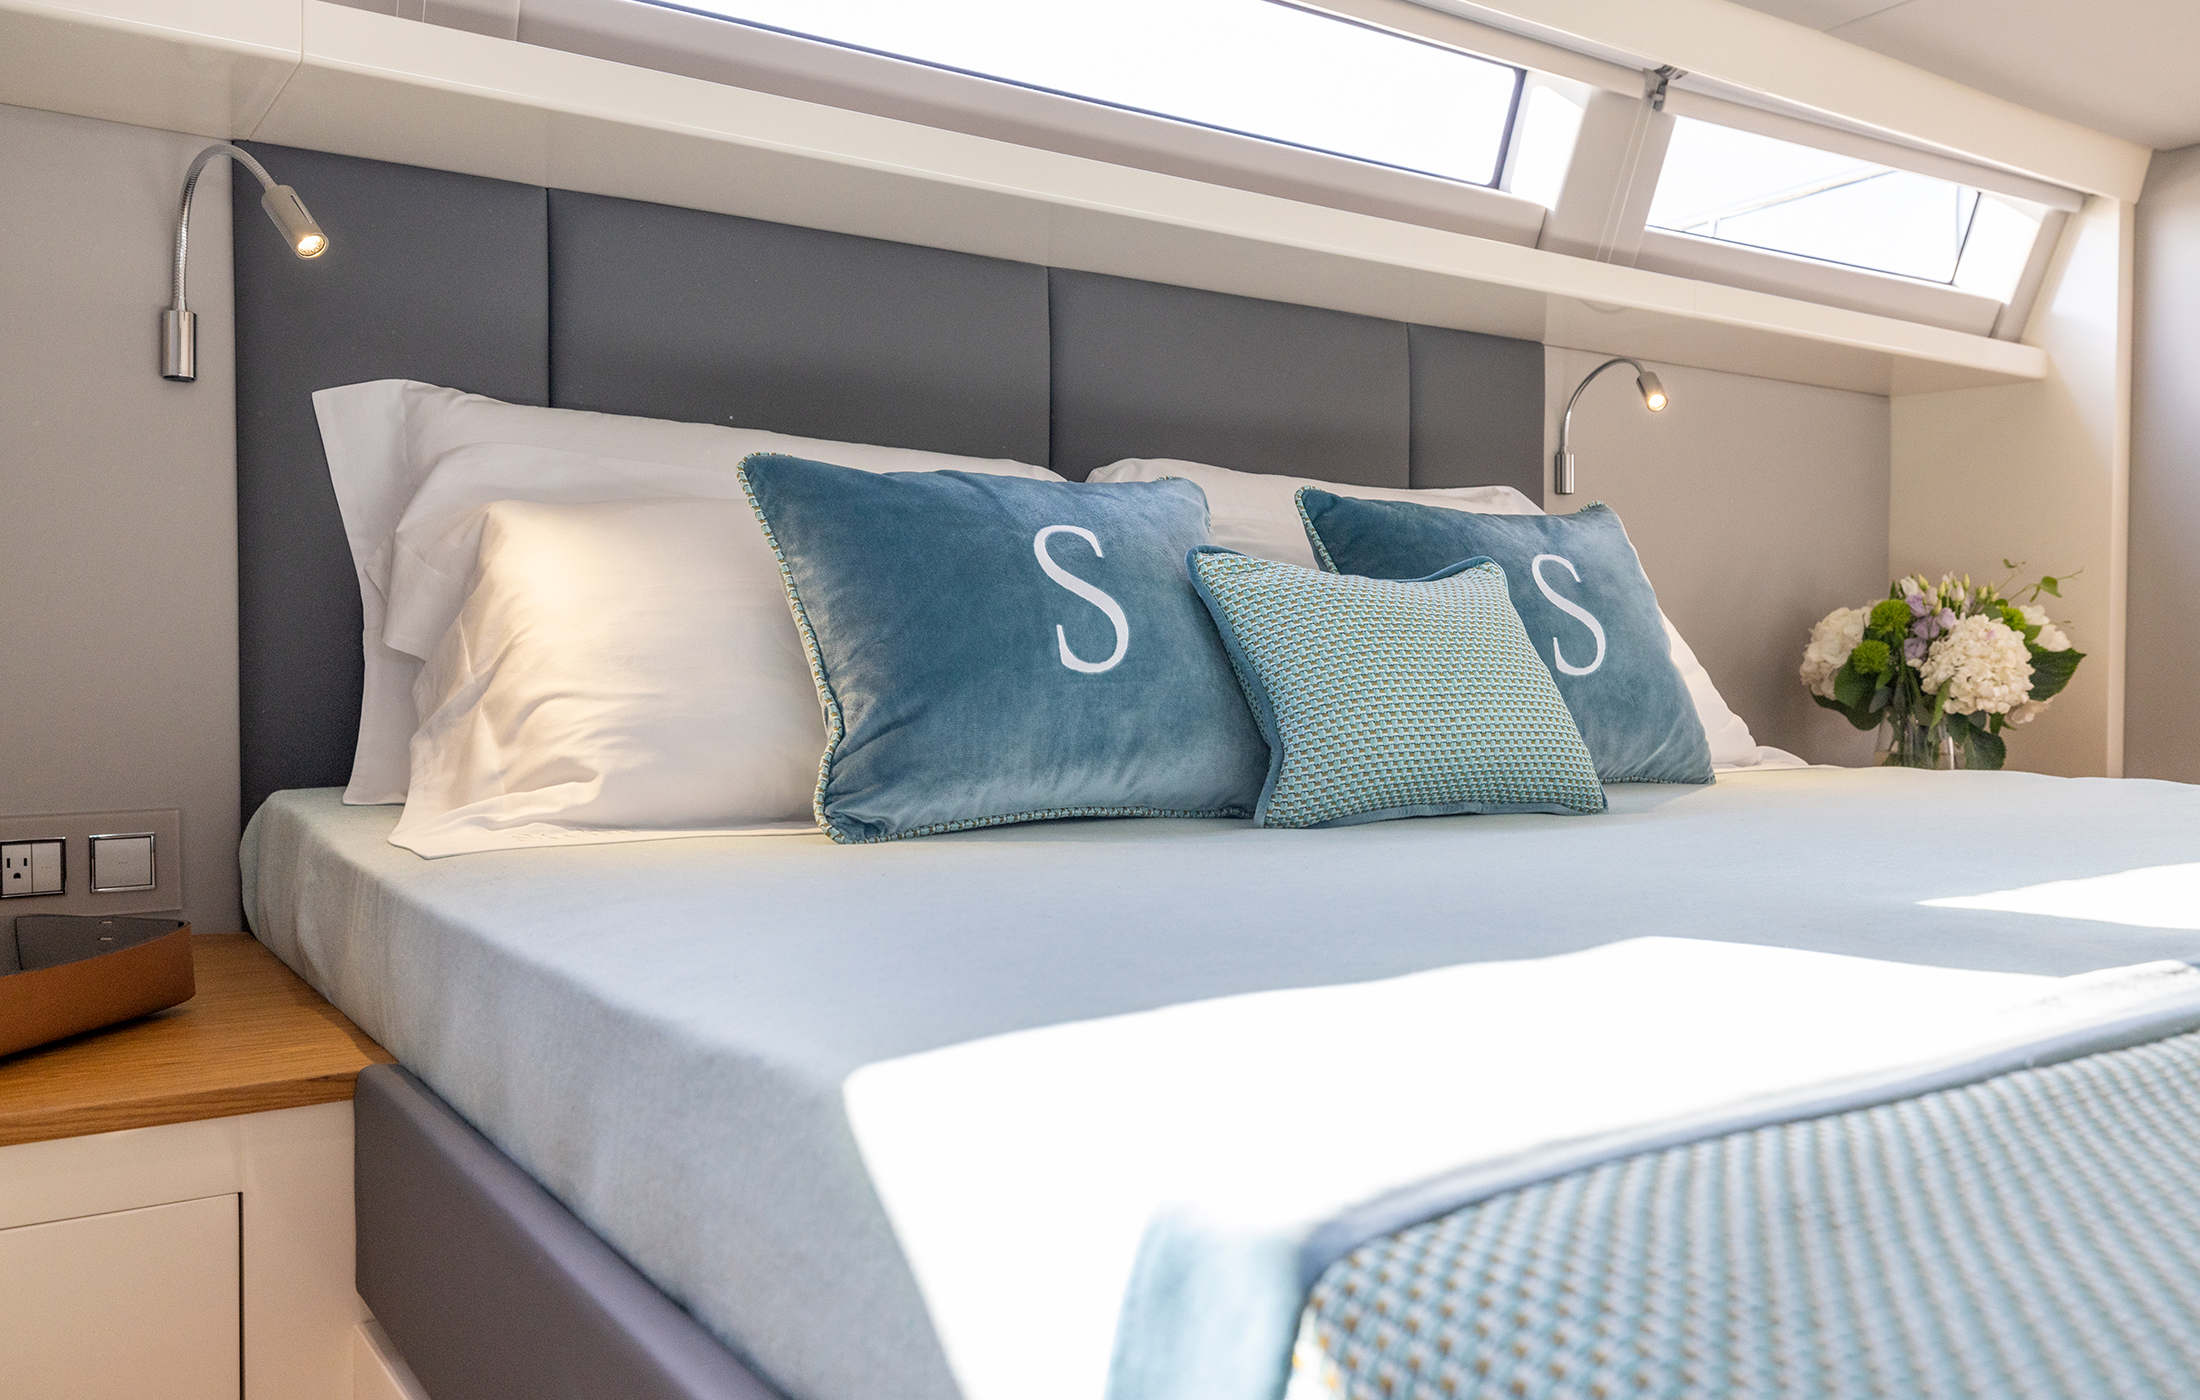 Main cabin with an extra large double bed in blue tones 